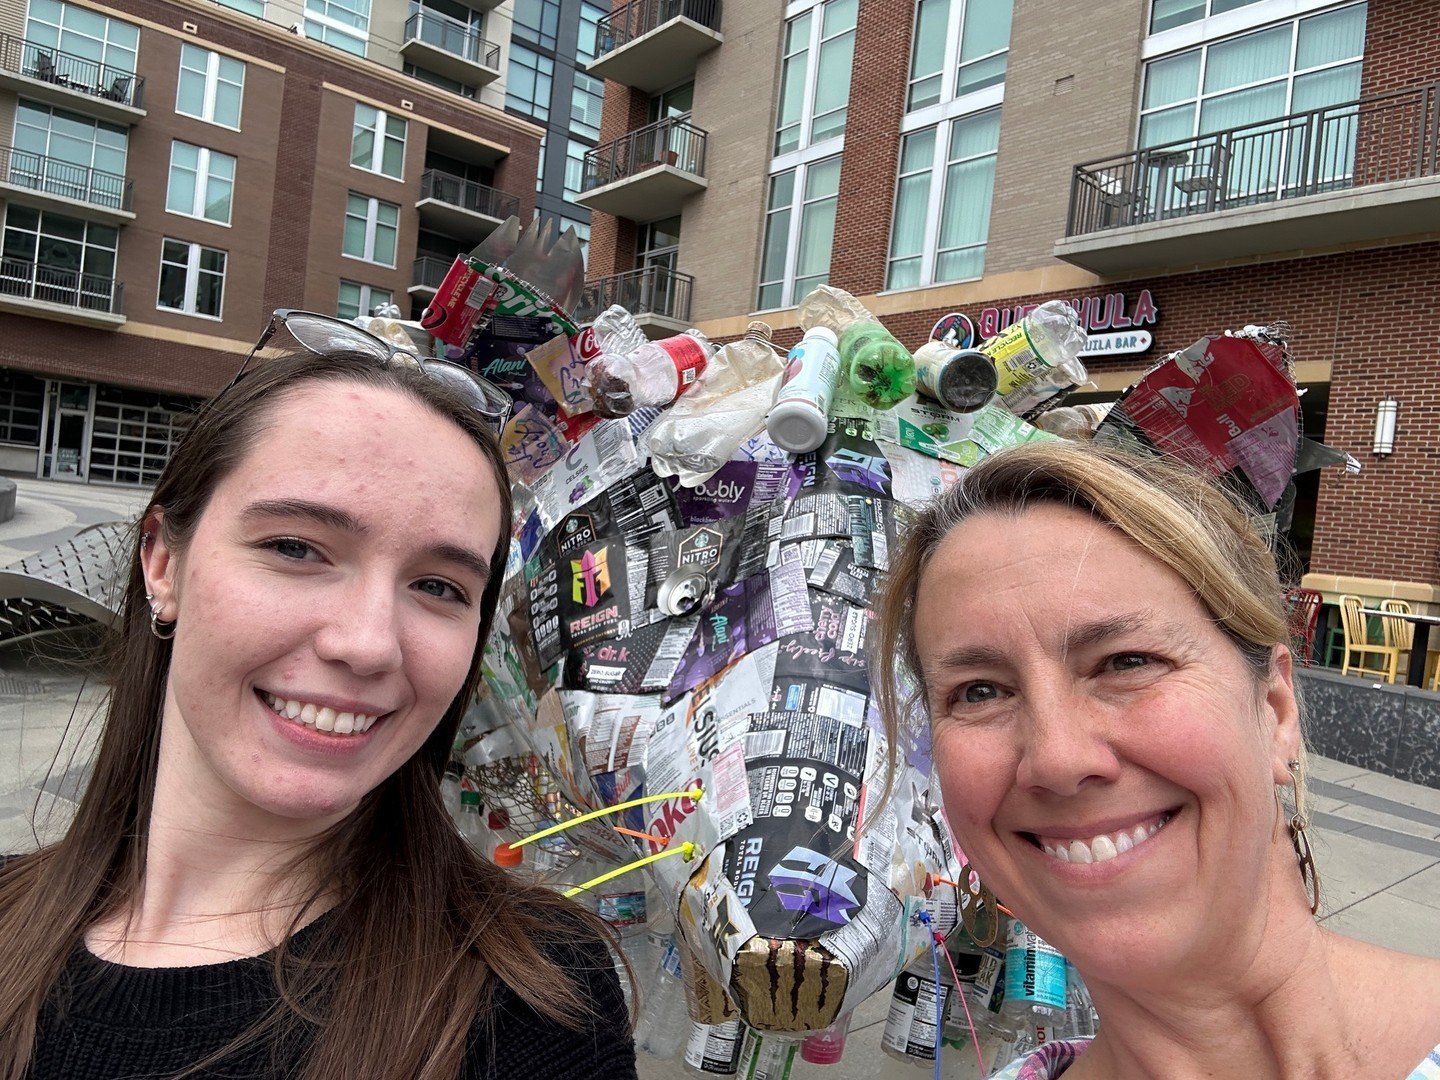 Out and about canvasing for our Makers Market on Franklin street yesterday, we spotted this super creative sculpture. Have any of you seen this yet? If so, what are your thoughts? ⁠
⁠
Also, let us know if you've seen any of our flyers around town! ⁠
